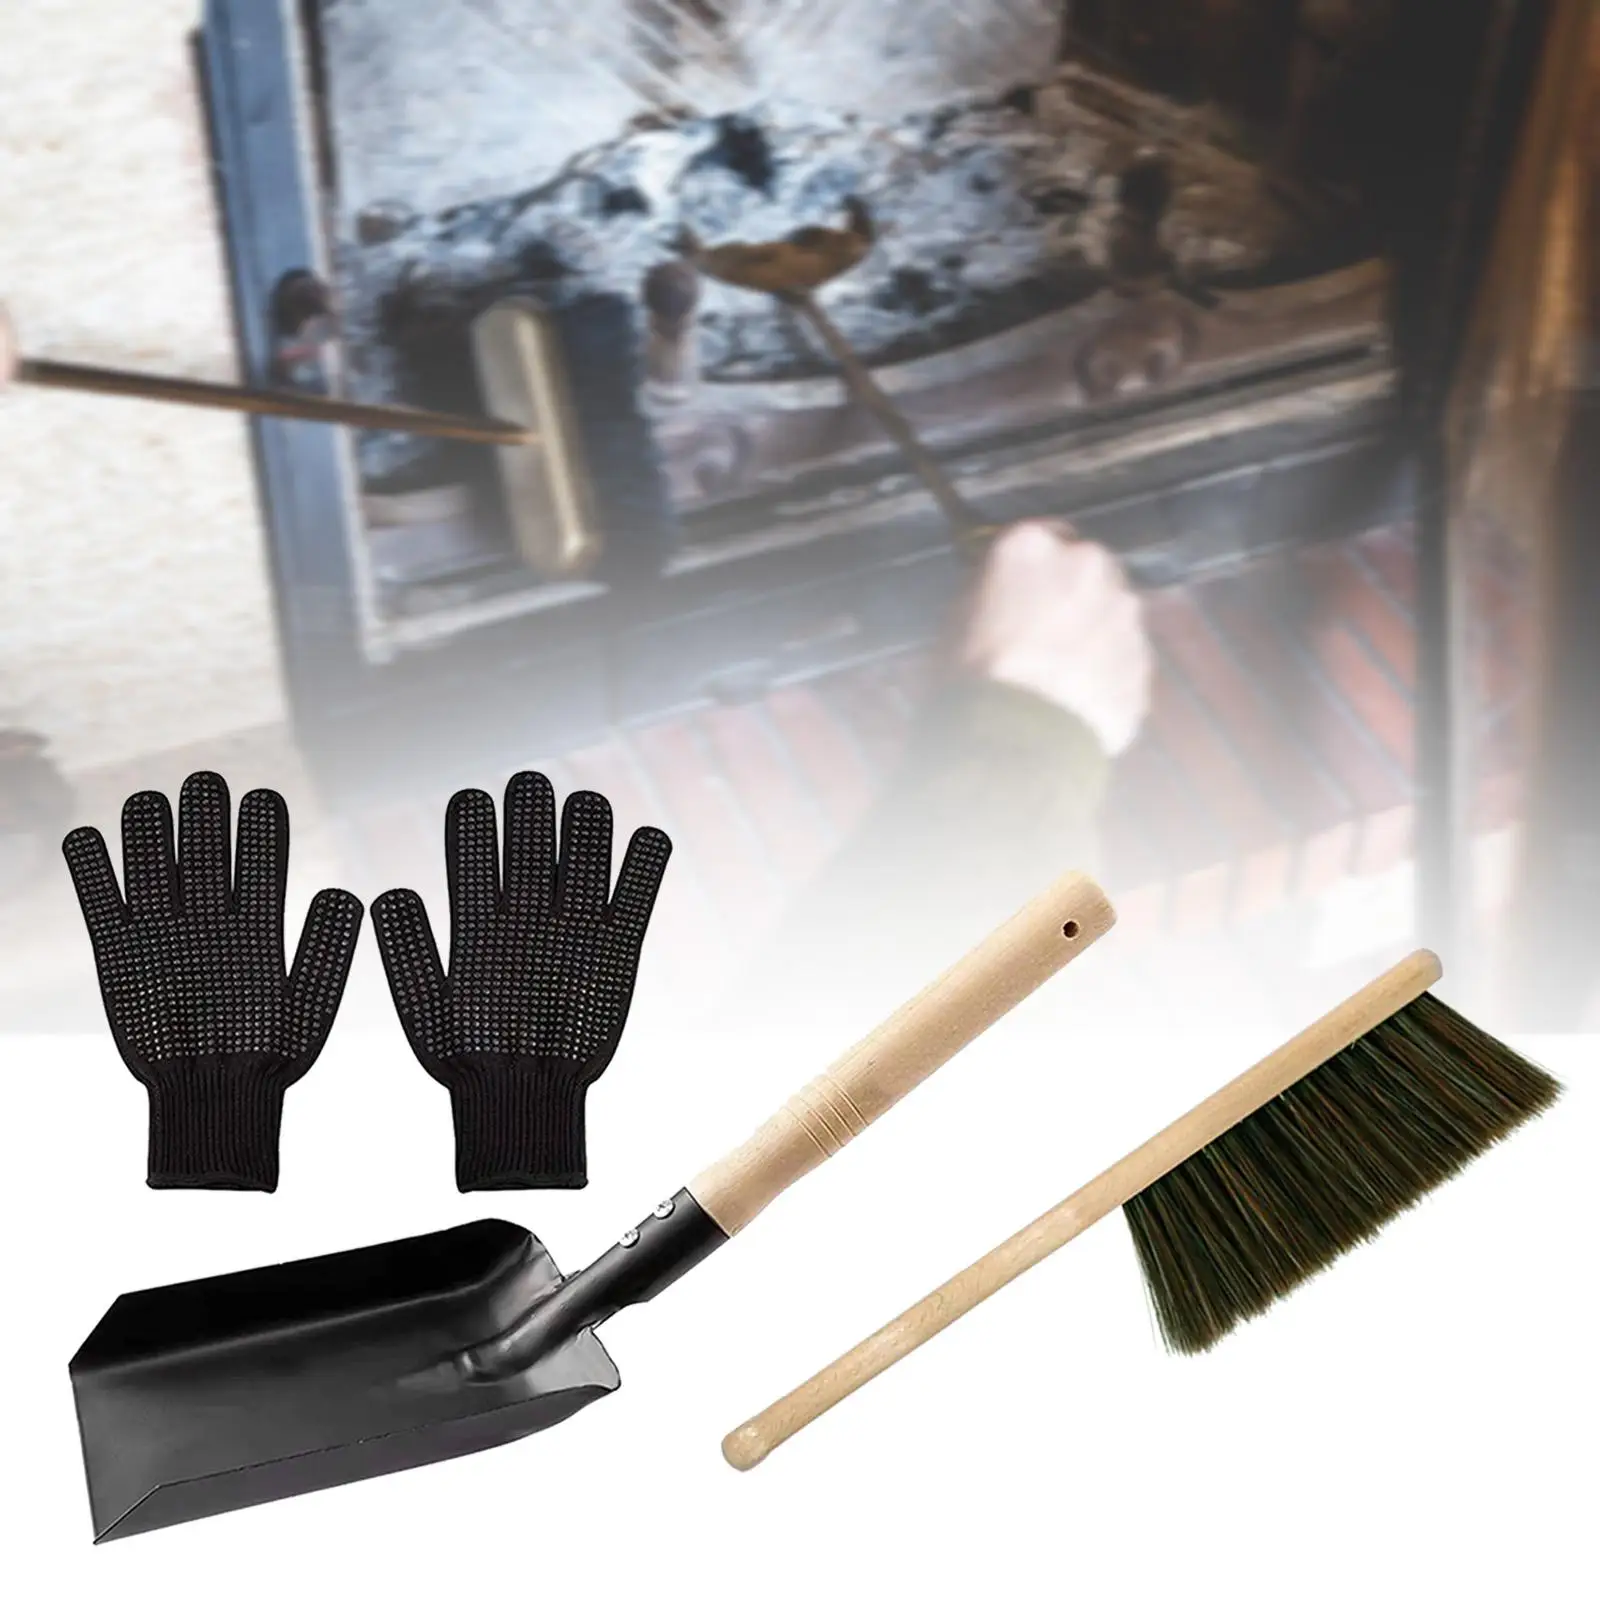 Fireplace Tools Set Ash Silicone Gloves Firepit Tools Dust Shovel Hearth Tidy Wood Burner Accessories for Dust Cleaning Indoor